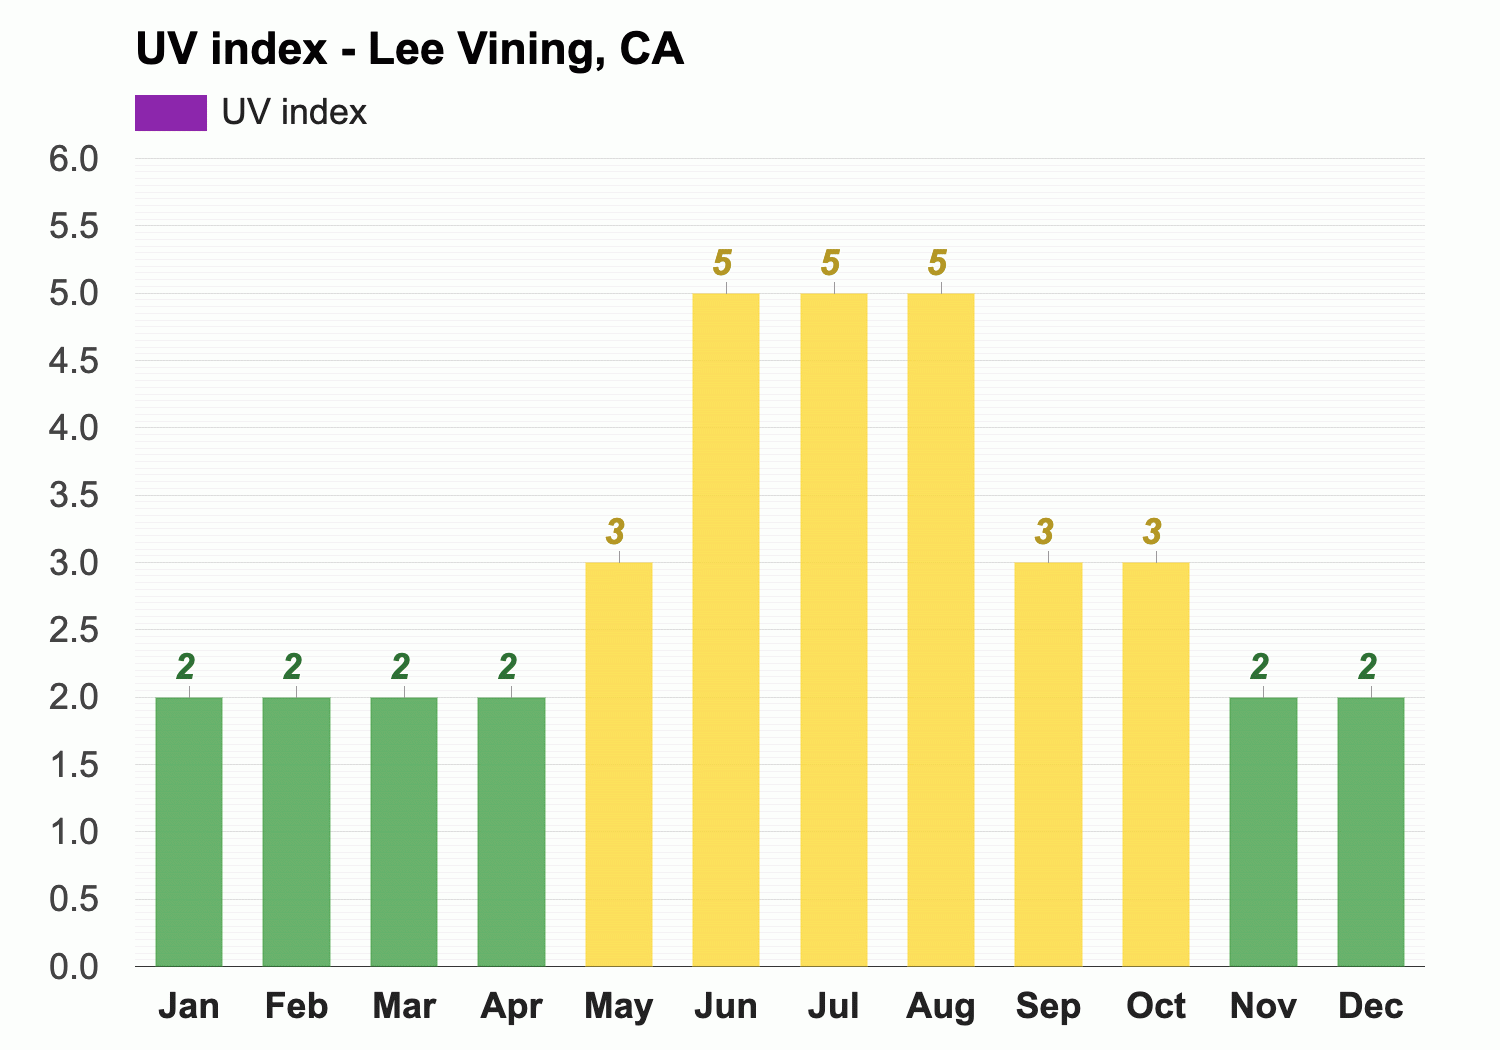 Lee Vining, CA - Climate & Monthly weather forecast